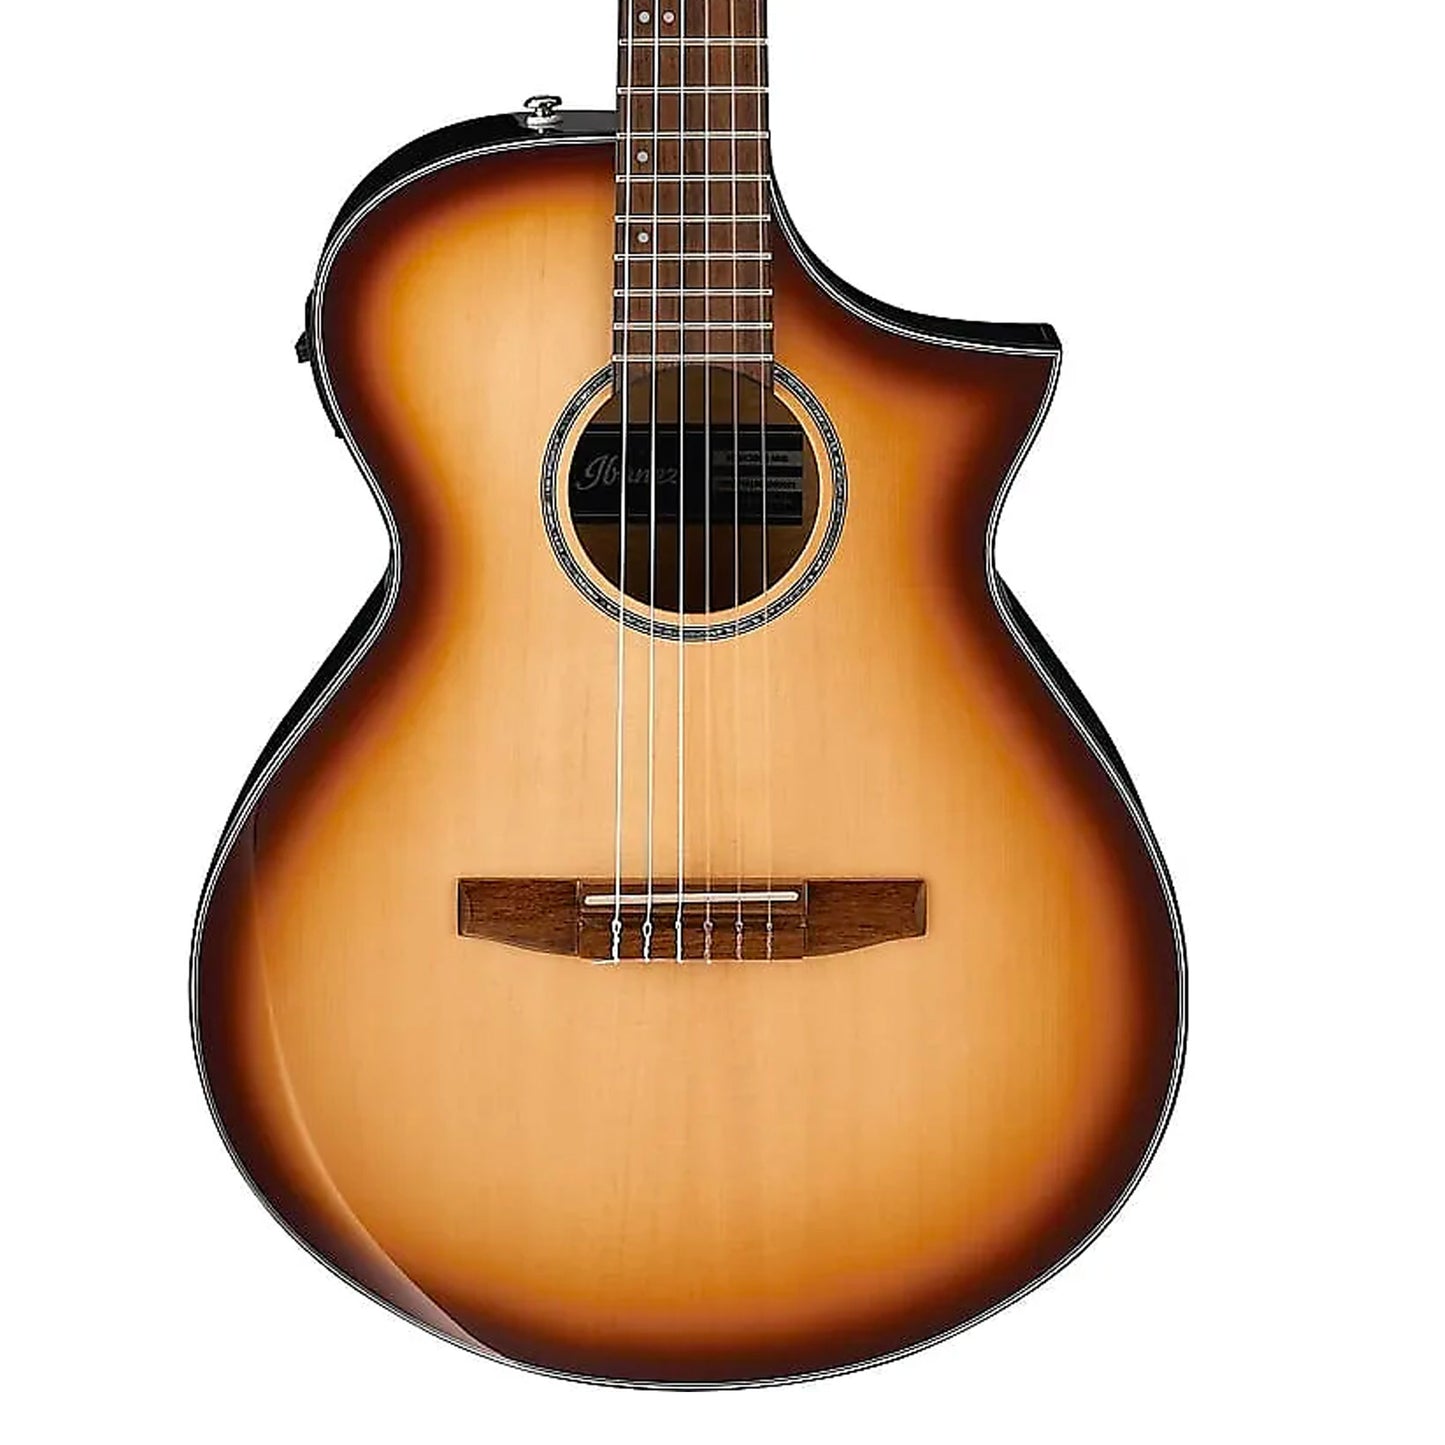 Ibanez AEWC300 Acoustic-Electric Guitar - Natural Browned Burst High Gloss